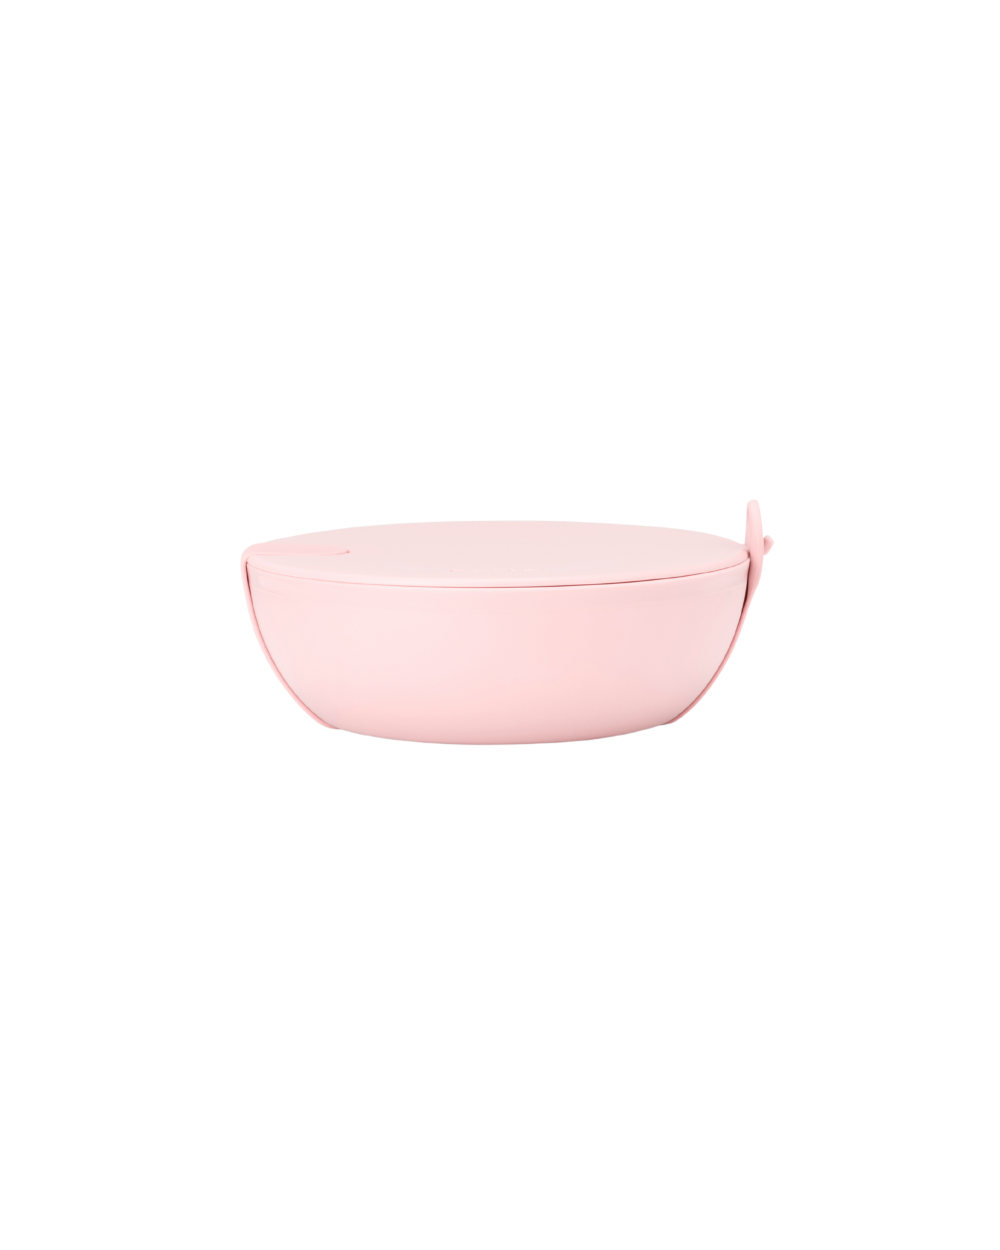 W&P Porter Plastic Bowl Lunch Container w/ Protective Non-slip Exterior,  Blush 1 Liter | Lid & Snap-…See more W&P Porter Plastic Bowl Lunch  Container